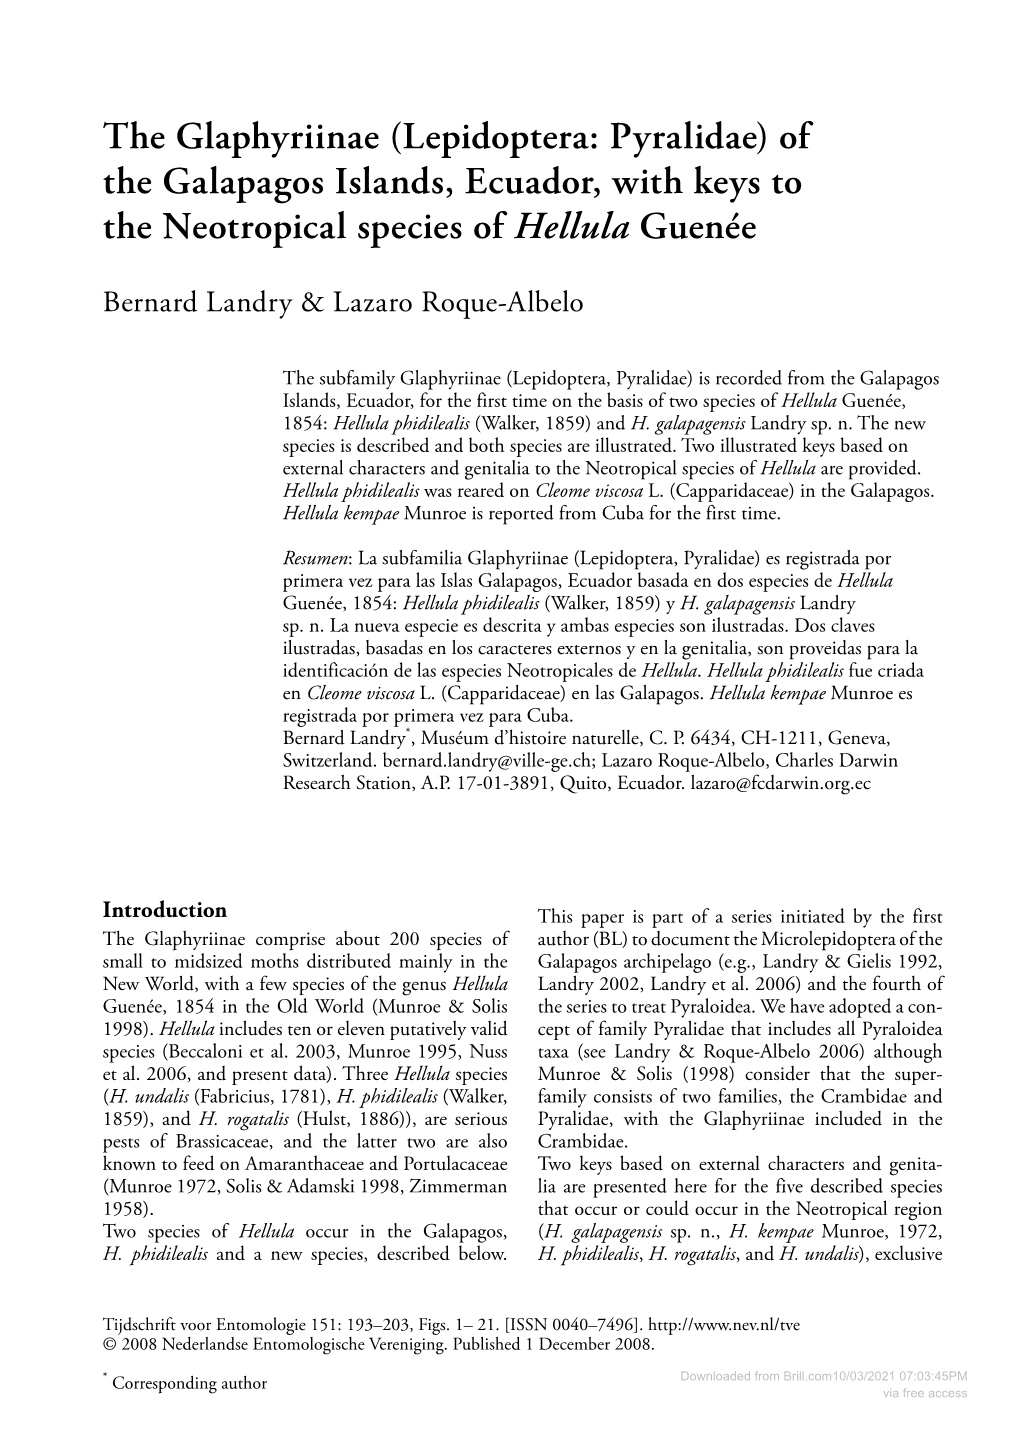 The Glaphyriinae (Lepidoptera: Pyralidae) of the Galapagos Islands, Ecuador, with Keys to the Neotropical Species of Hellula Guenée